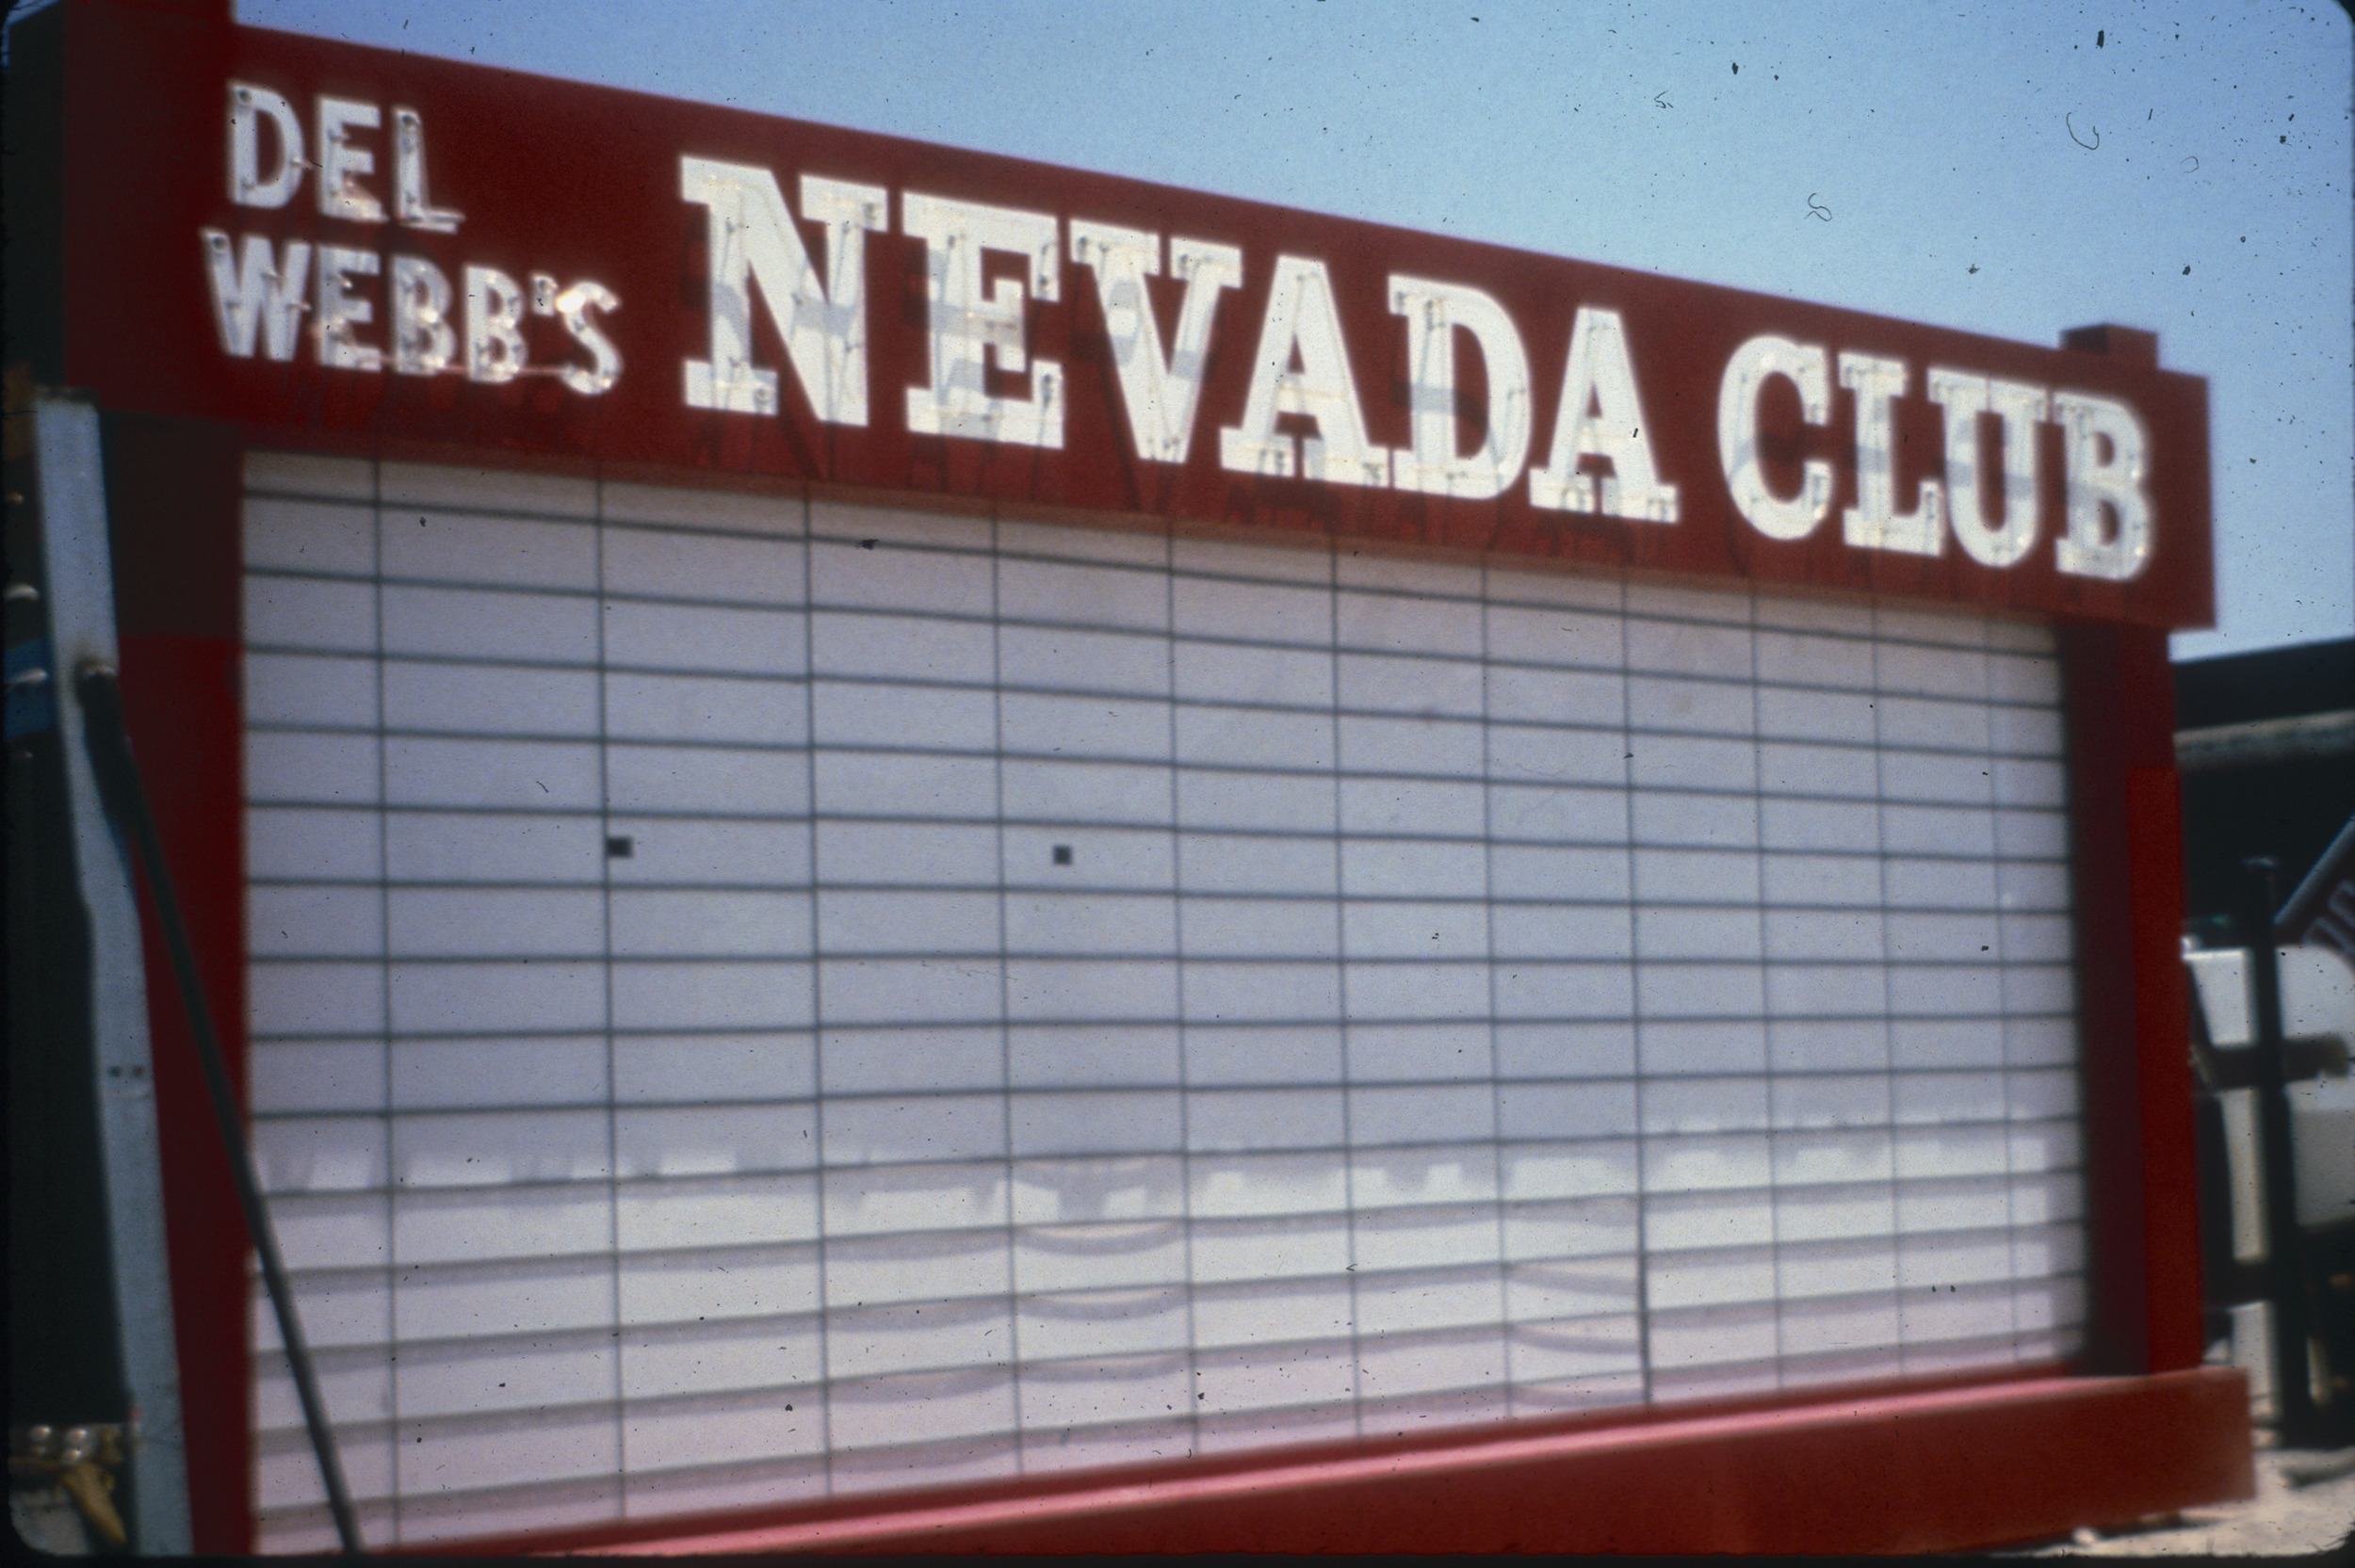 Slide of the Young Electric Sign Company (YESCO) sign graveyard, Las Vegas, 1986